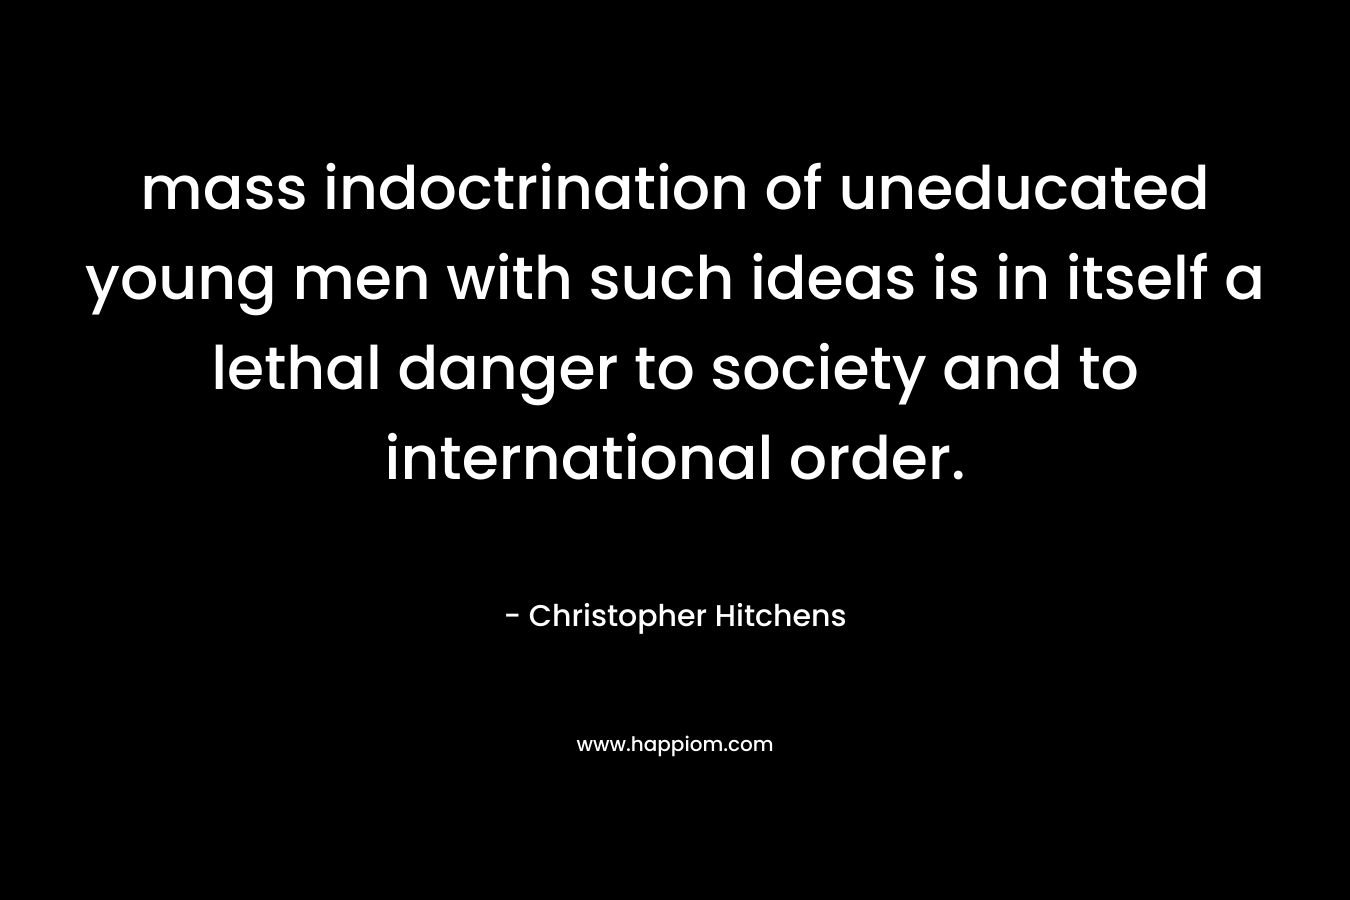 mass indoctrination of uneducated young men with such ideas is in itself a lethal danger to society and to international order. – Christopher Hitchens